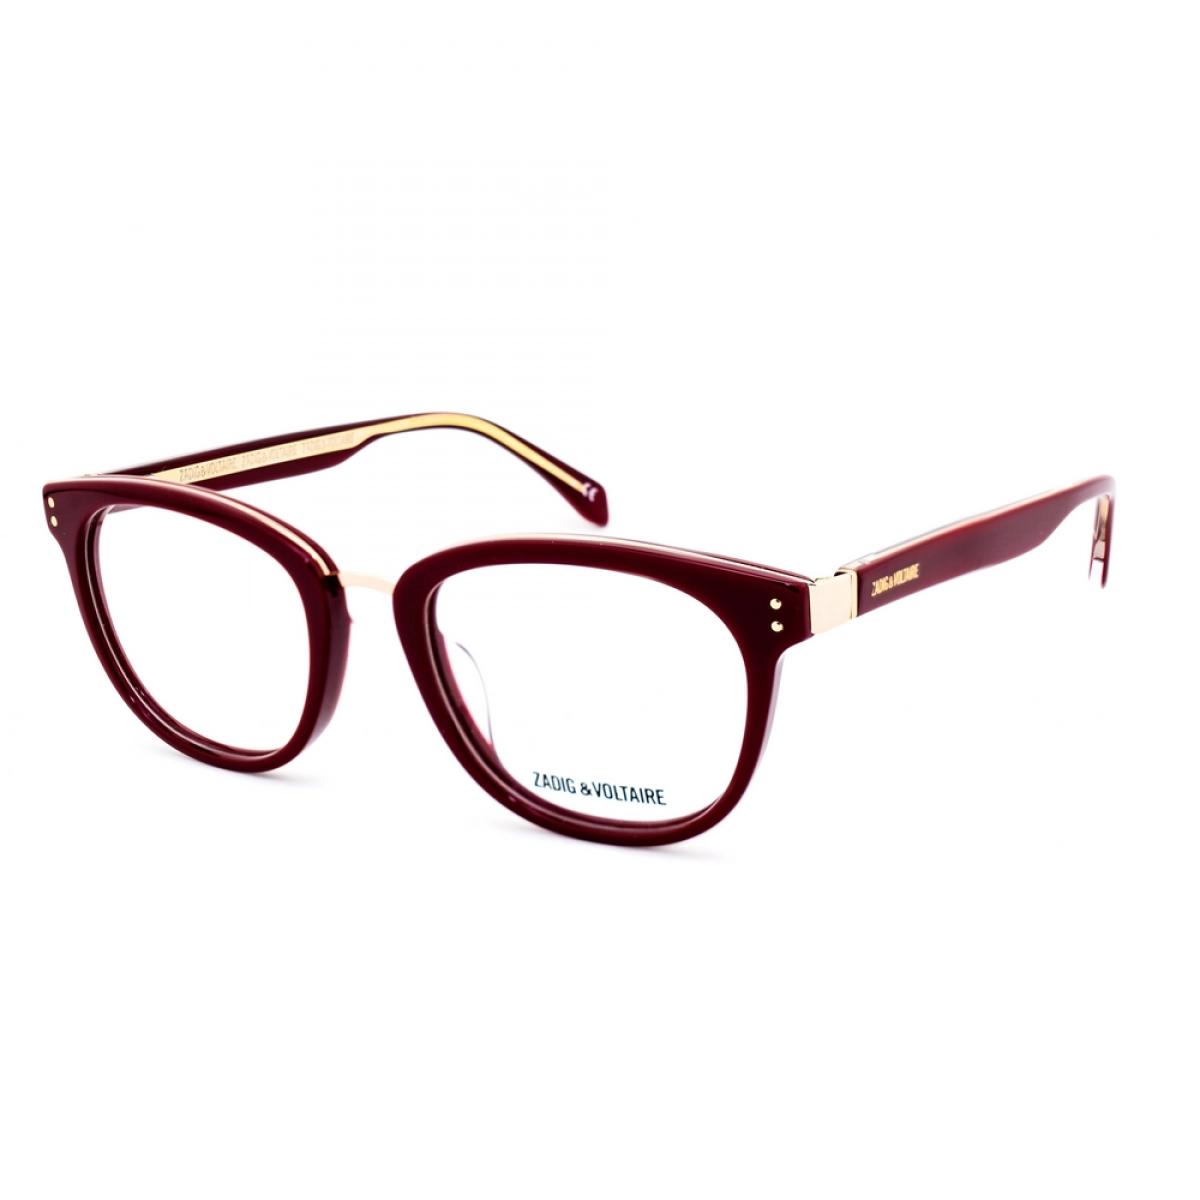 LUNETTES FEMME ZADIG&VOLTAIRE VZV162N-09FH Zadig & Voltaire